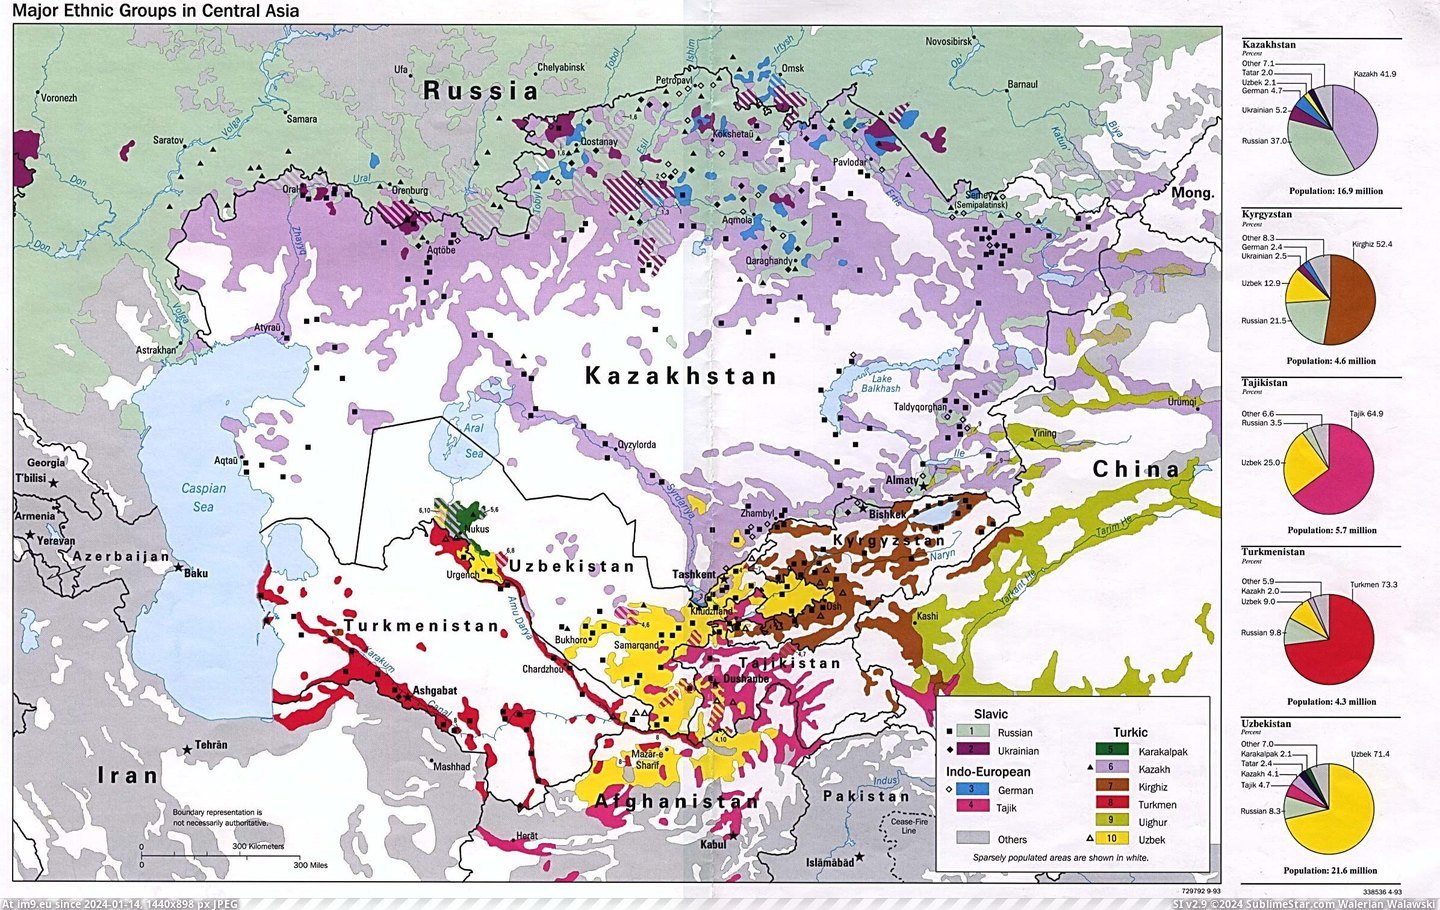 #Major #Asia #Groups #Central #Ethnic [Mapporn] Major Ethnic Groups in Central Asia [2392x1504] Pic. (Obraz z album My r/MAPS favs))